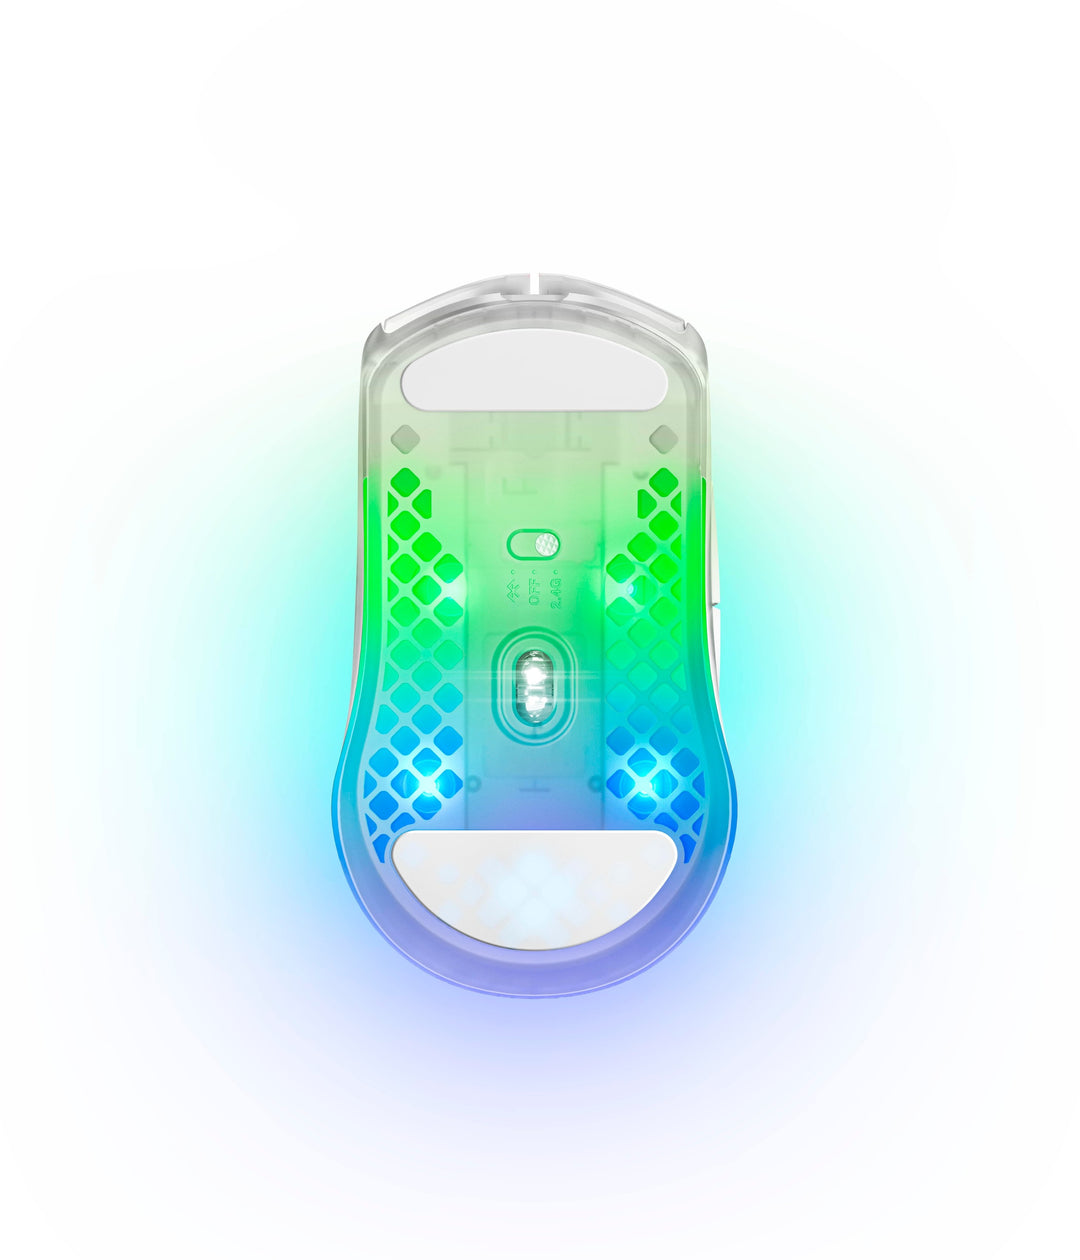 SteelSeries - Aerox 3 Ghost Lightweight Wireless Optical Gaming Mouse with Translucent Design - White_3